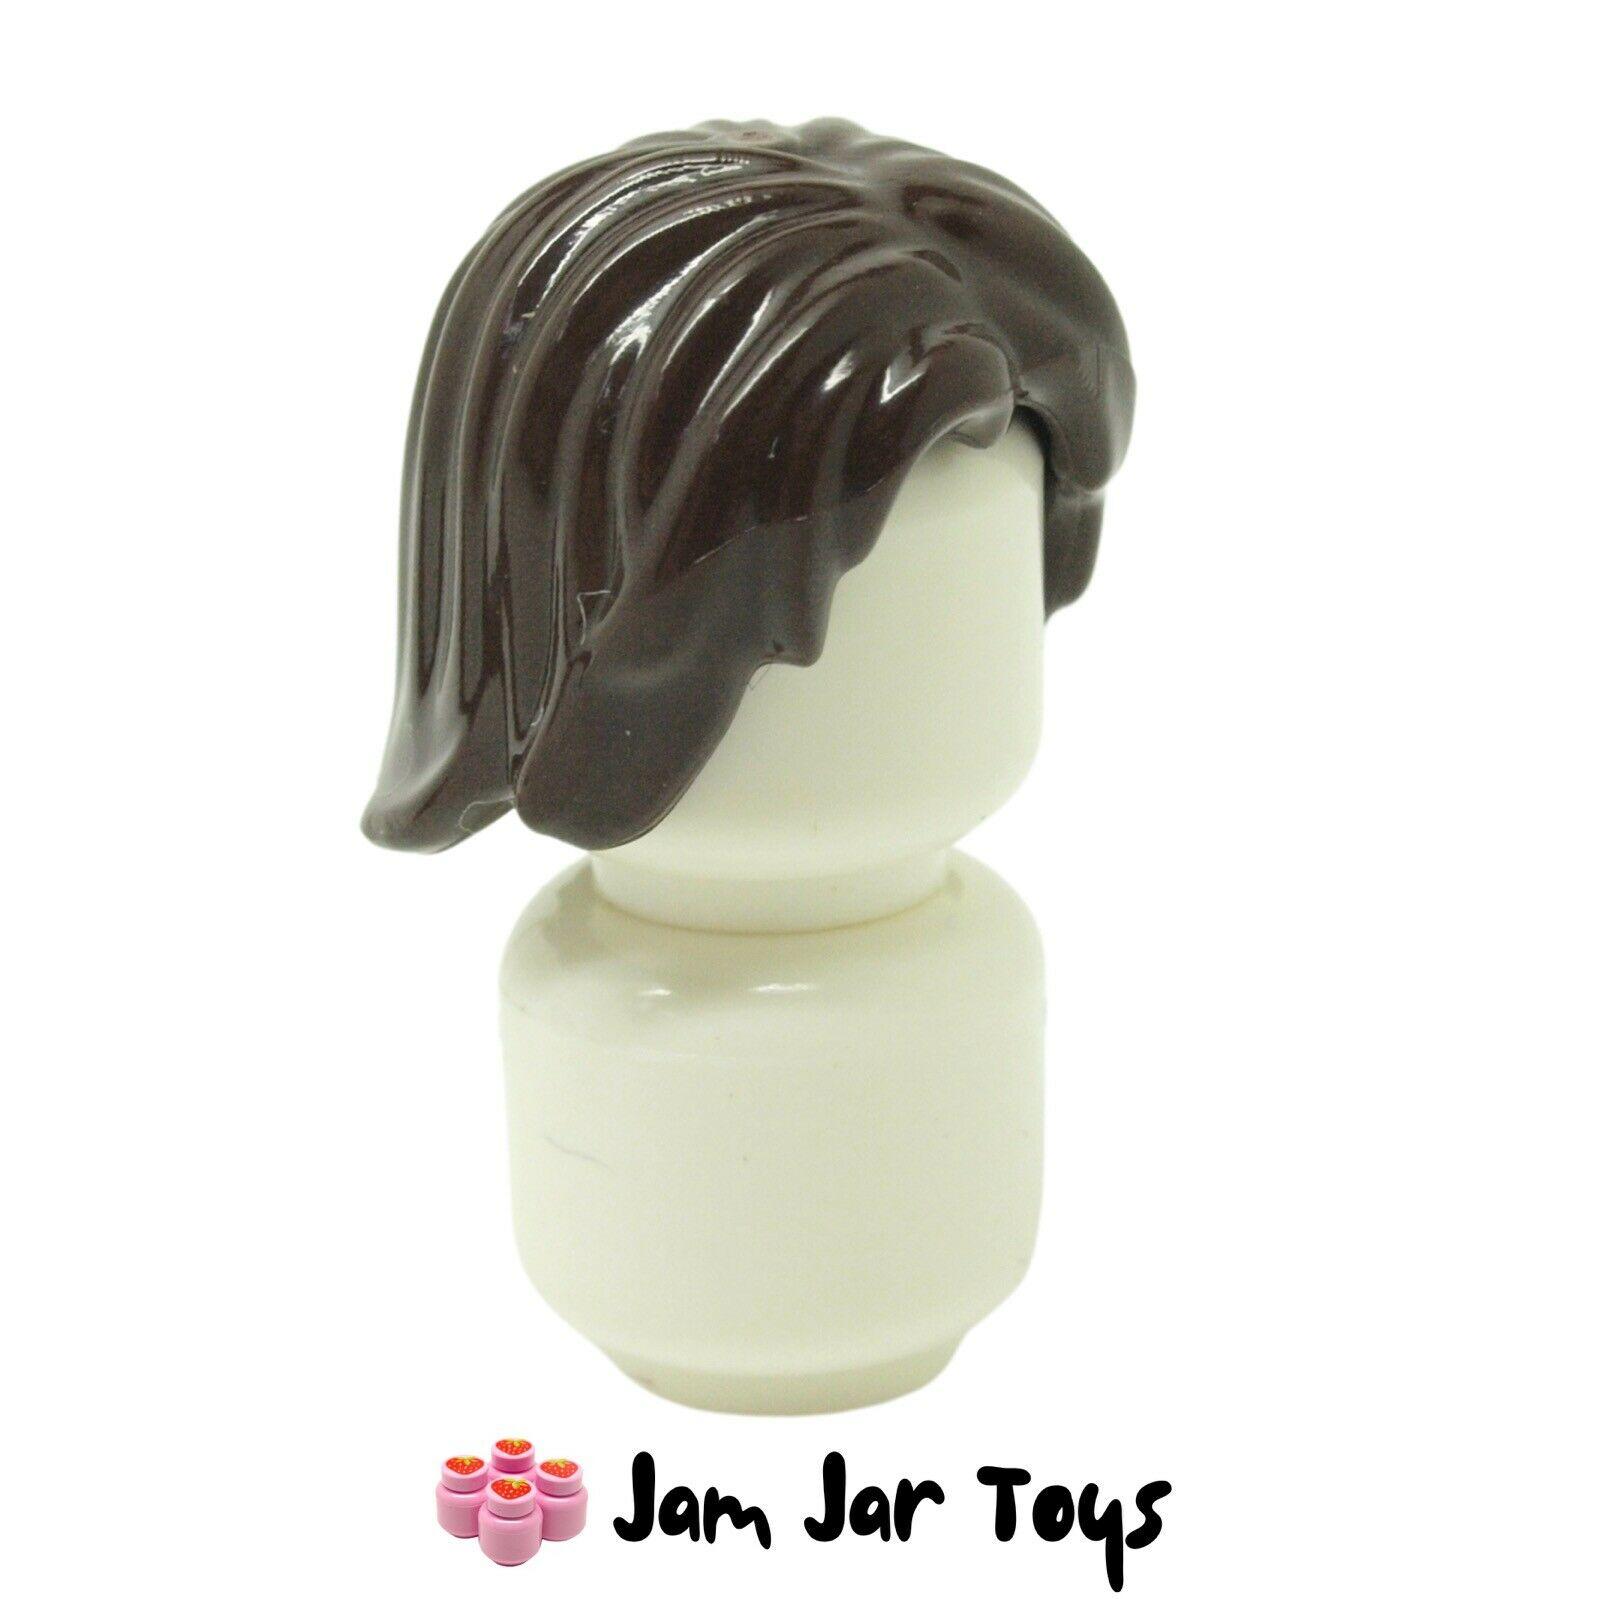 Lego New Black Minifigure Hair Spiked Wig Boy Town Piece 